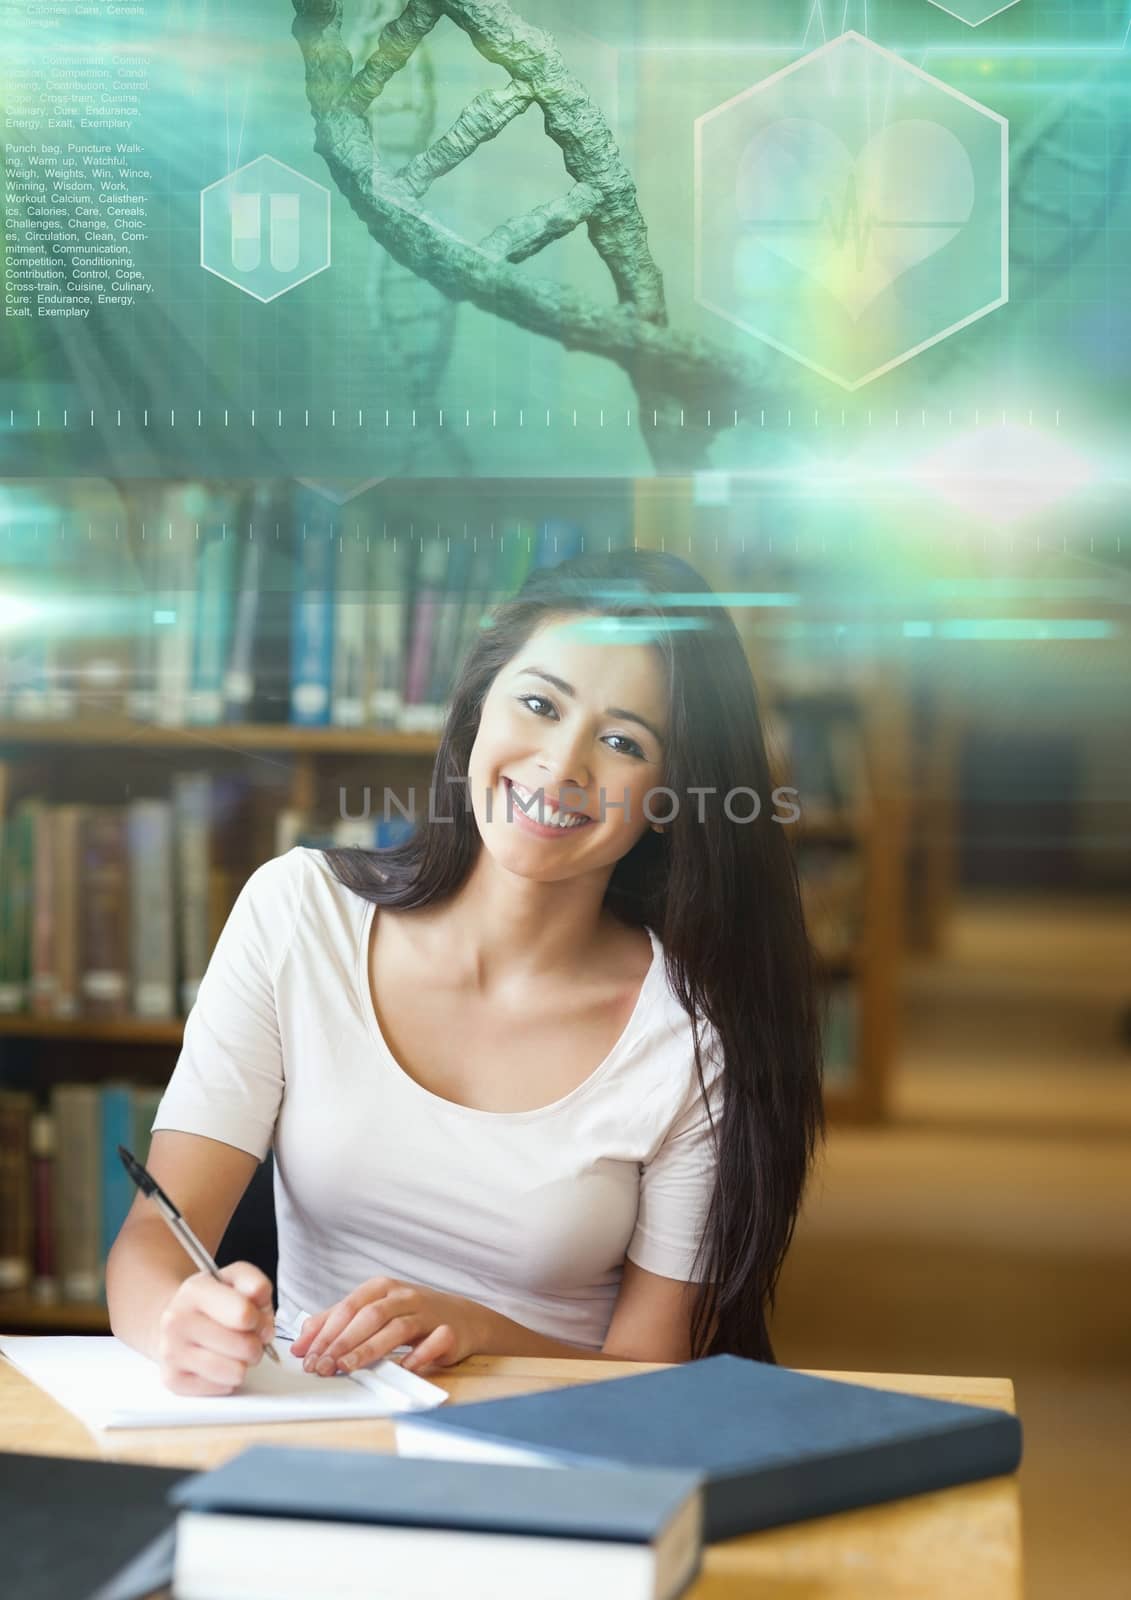 Female Student studying with notes and science education interface graphics overlay by Wavebreakmedia